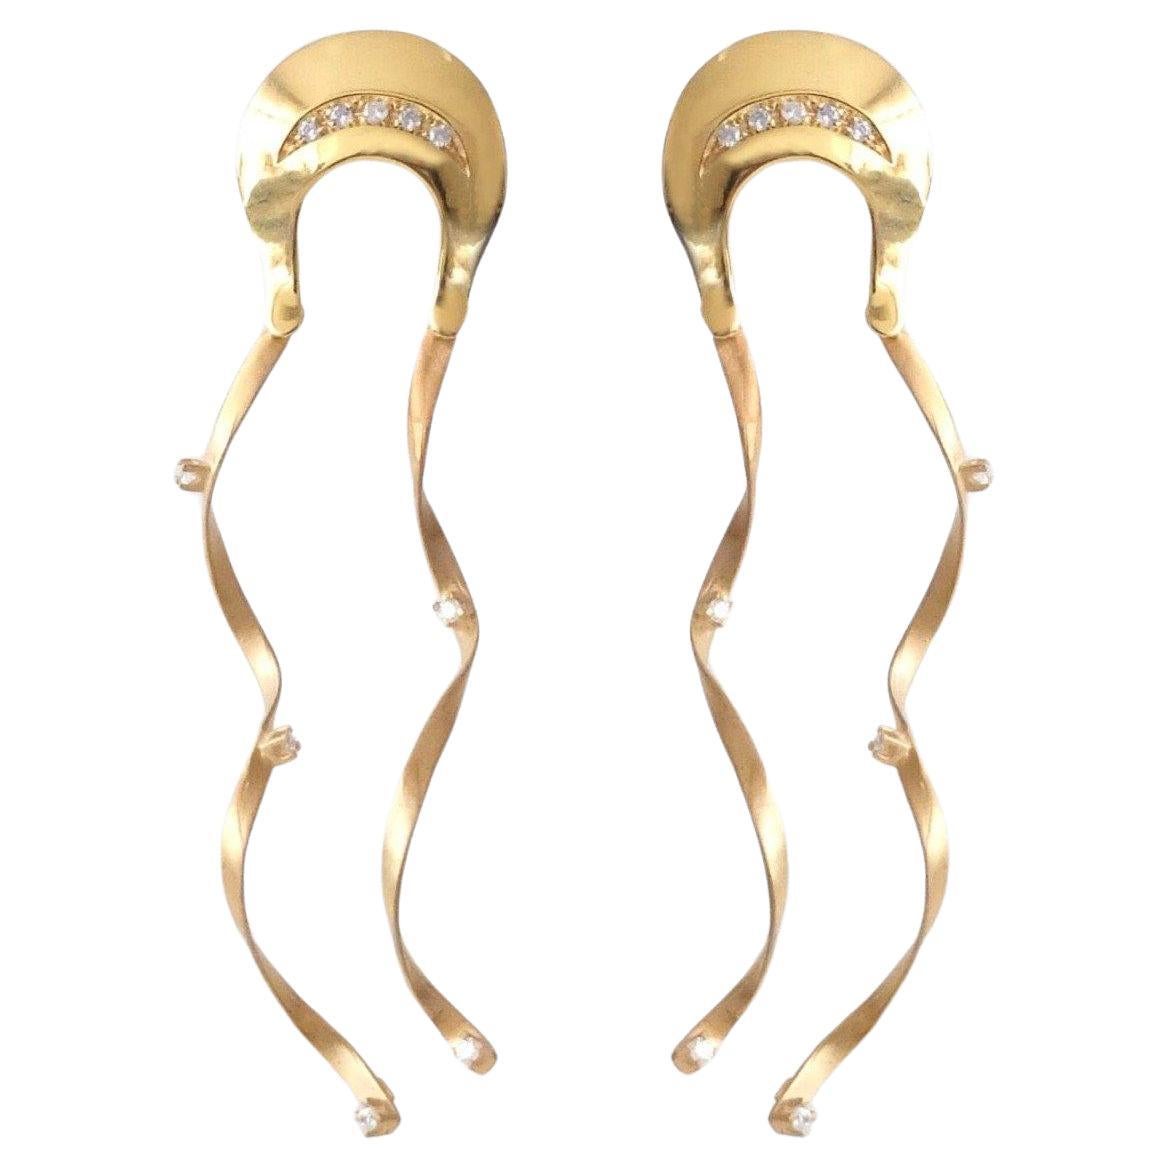 Earrings 925 CZ silver, 18 kt. gold plated, made in Italy, Méduse